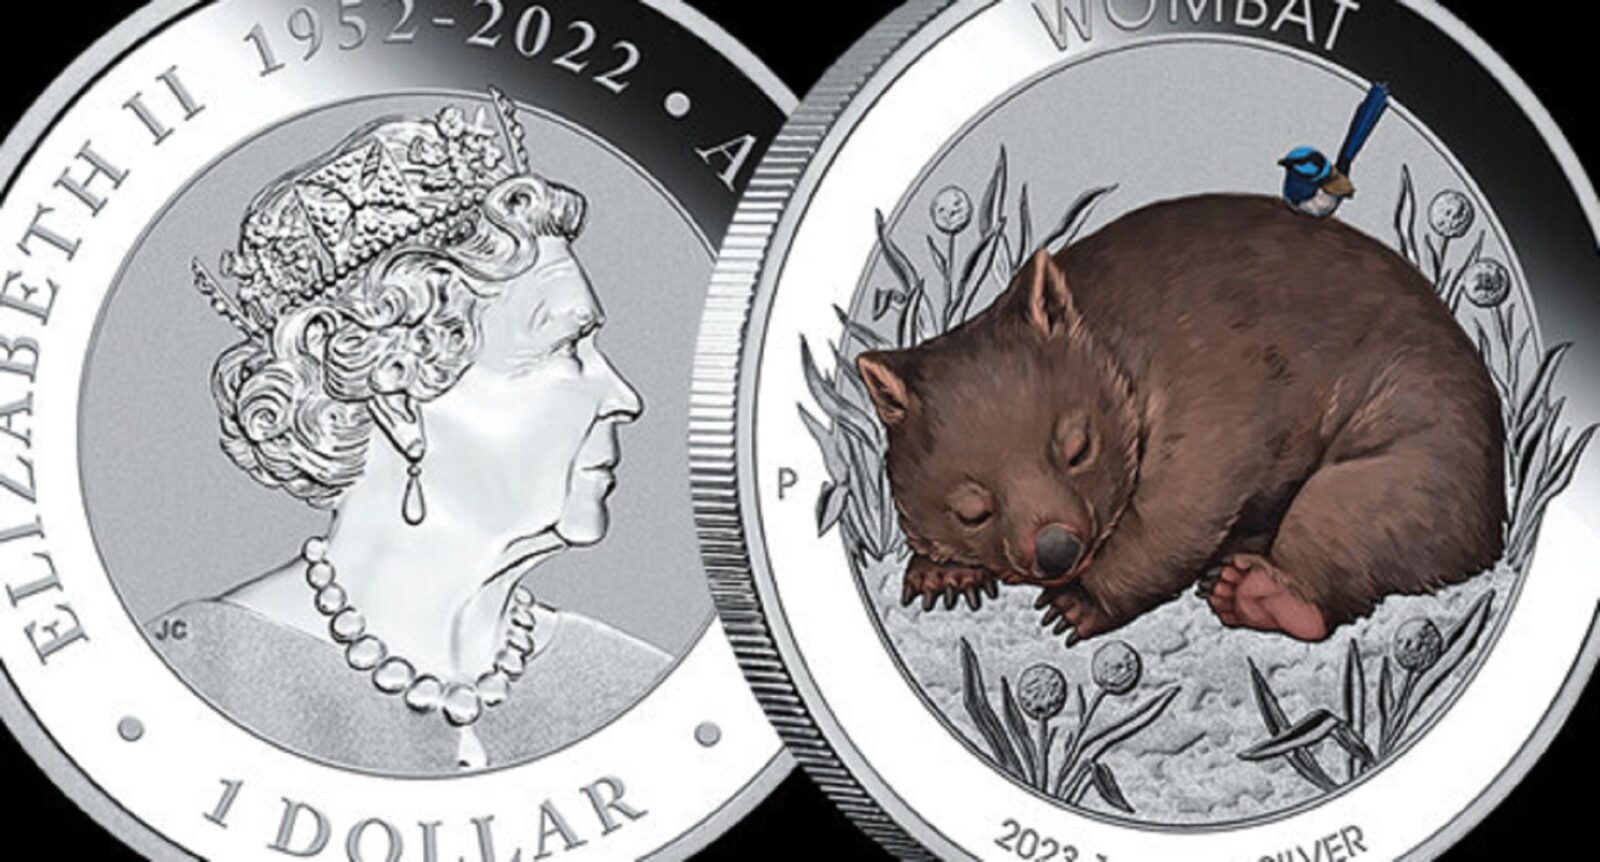 Wombat coin released by the Perth Mint